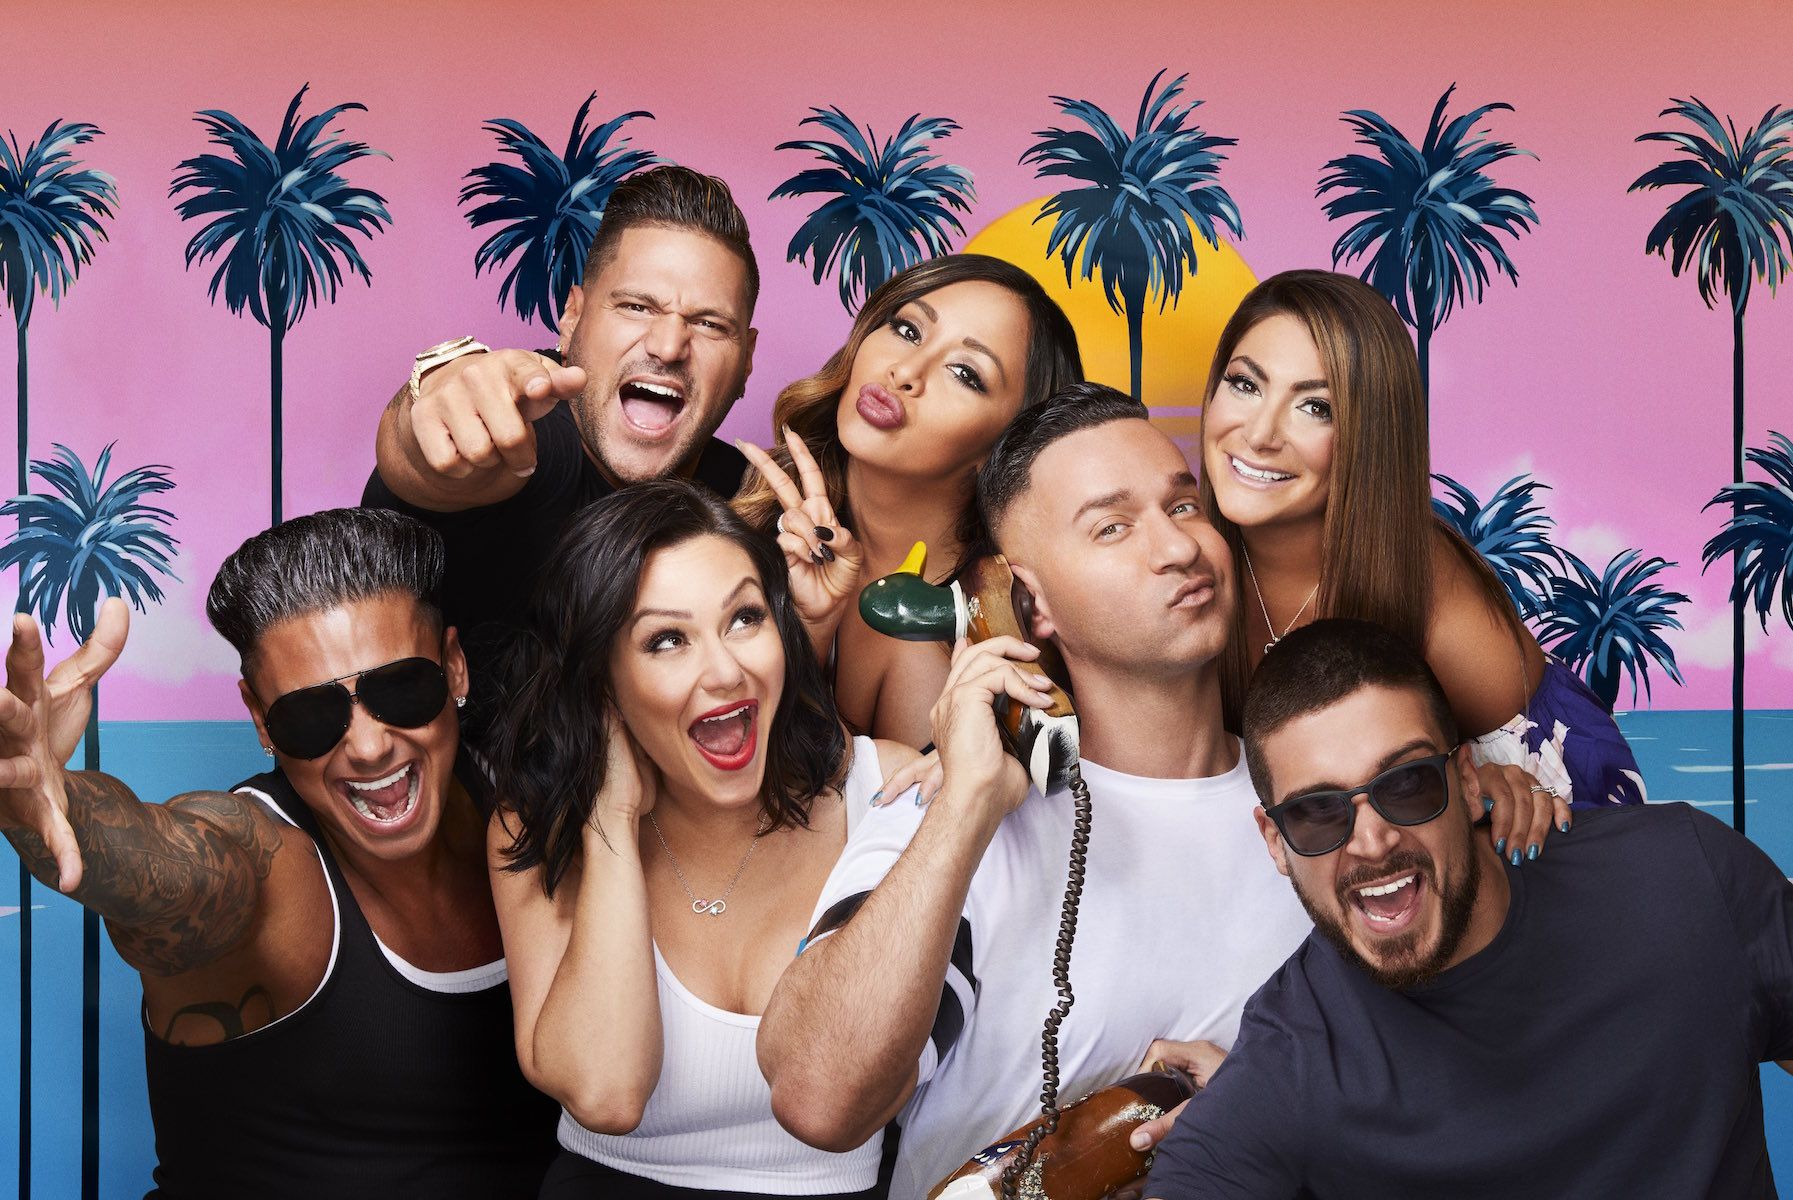 Jersey Shore' premiered 10 years ago on MTV. Here's why the global